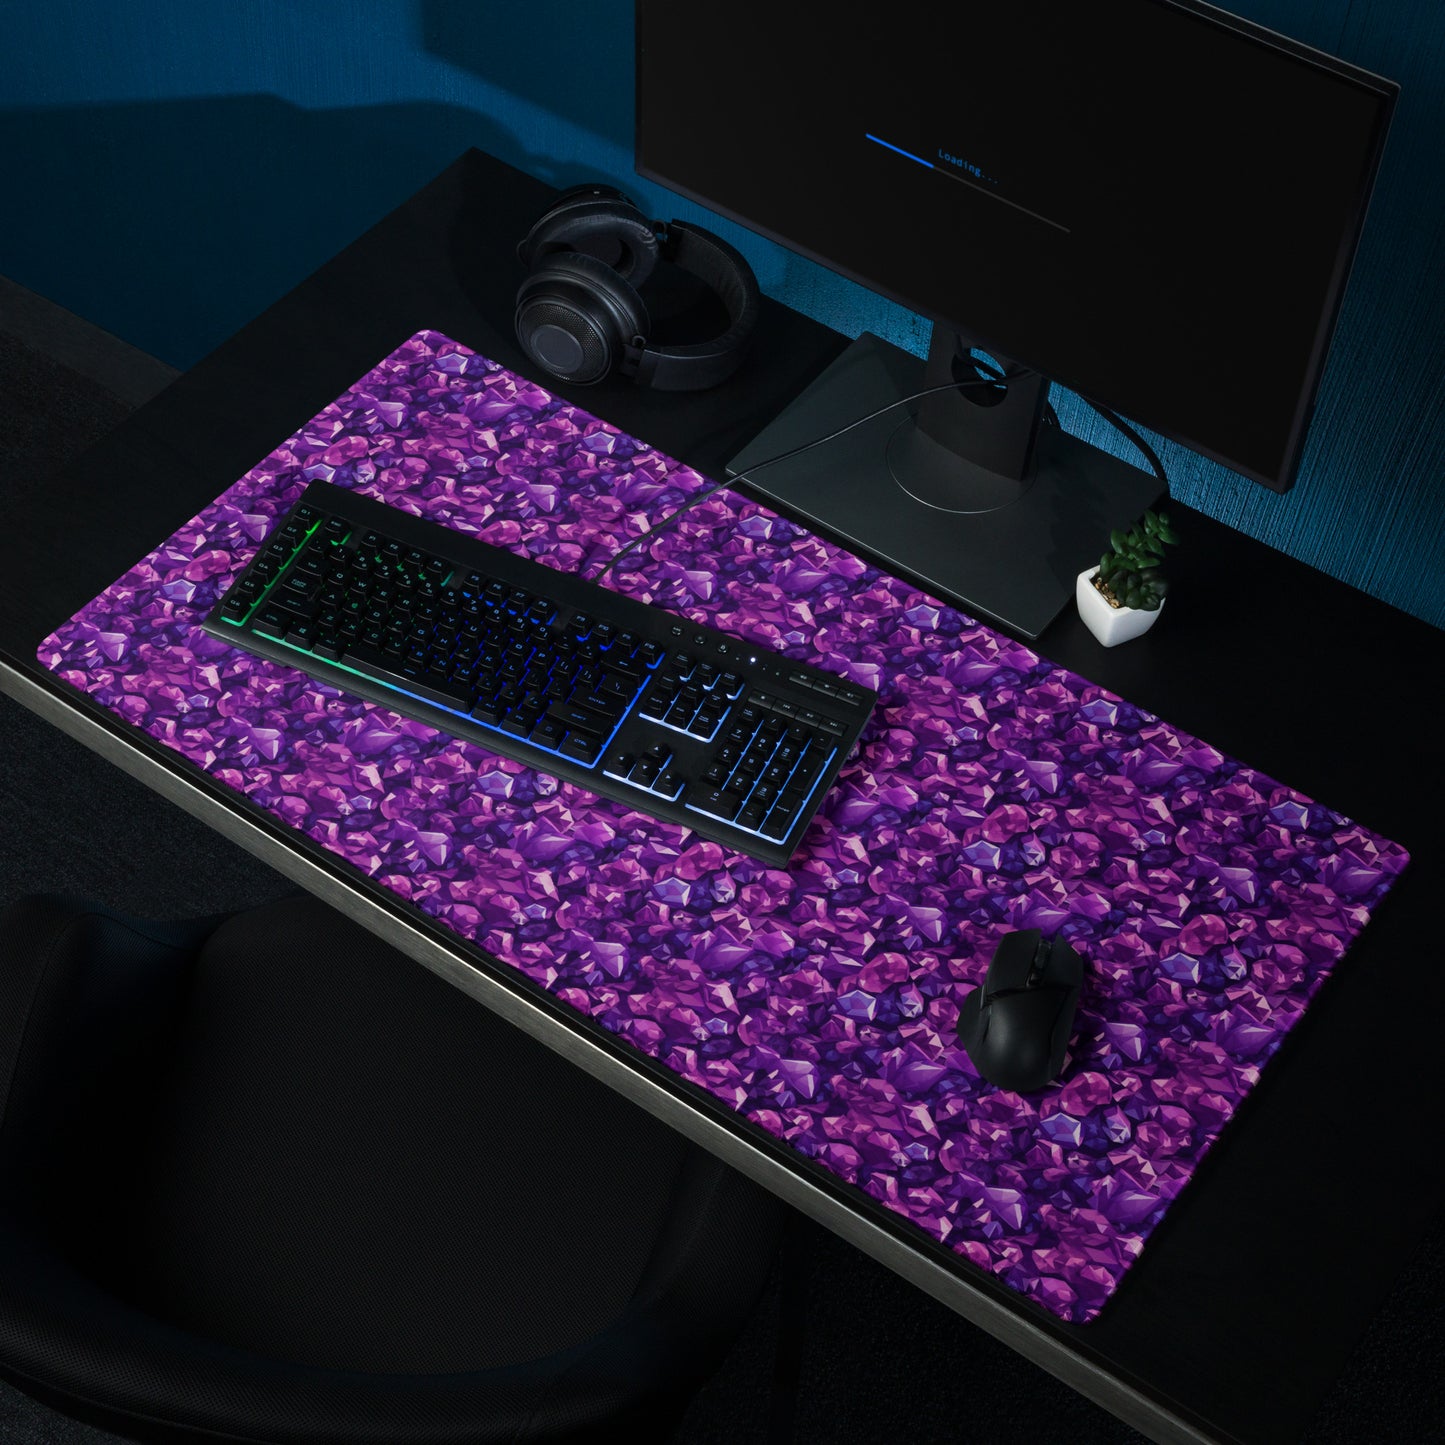 A 36" x 18" gaming desk pad with purple crystals. It sits on a black desk with a monitor, keyboard, and mouse.